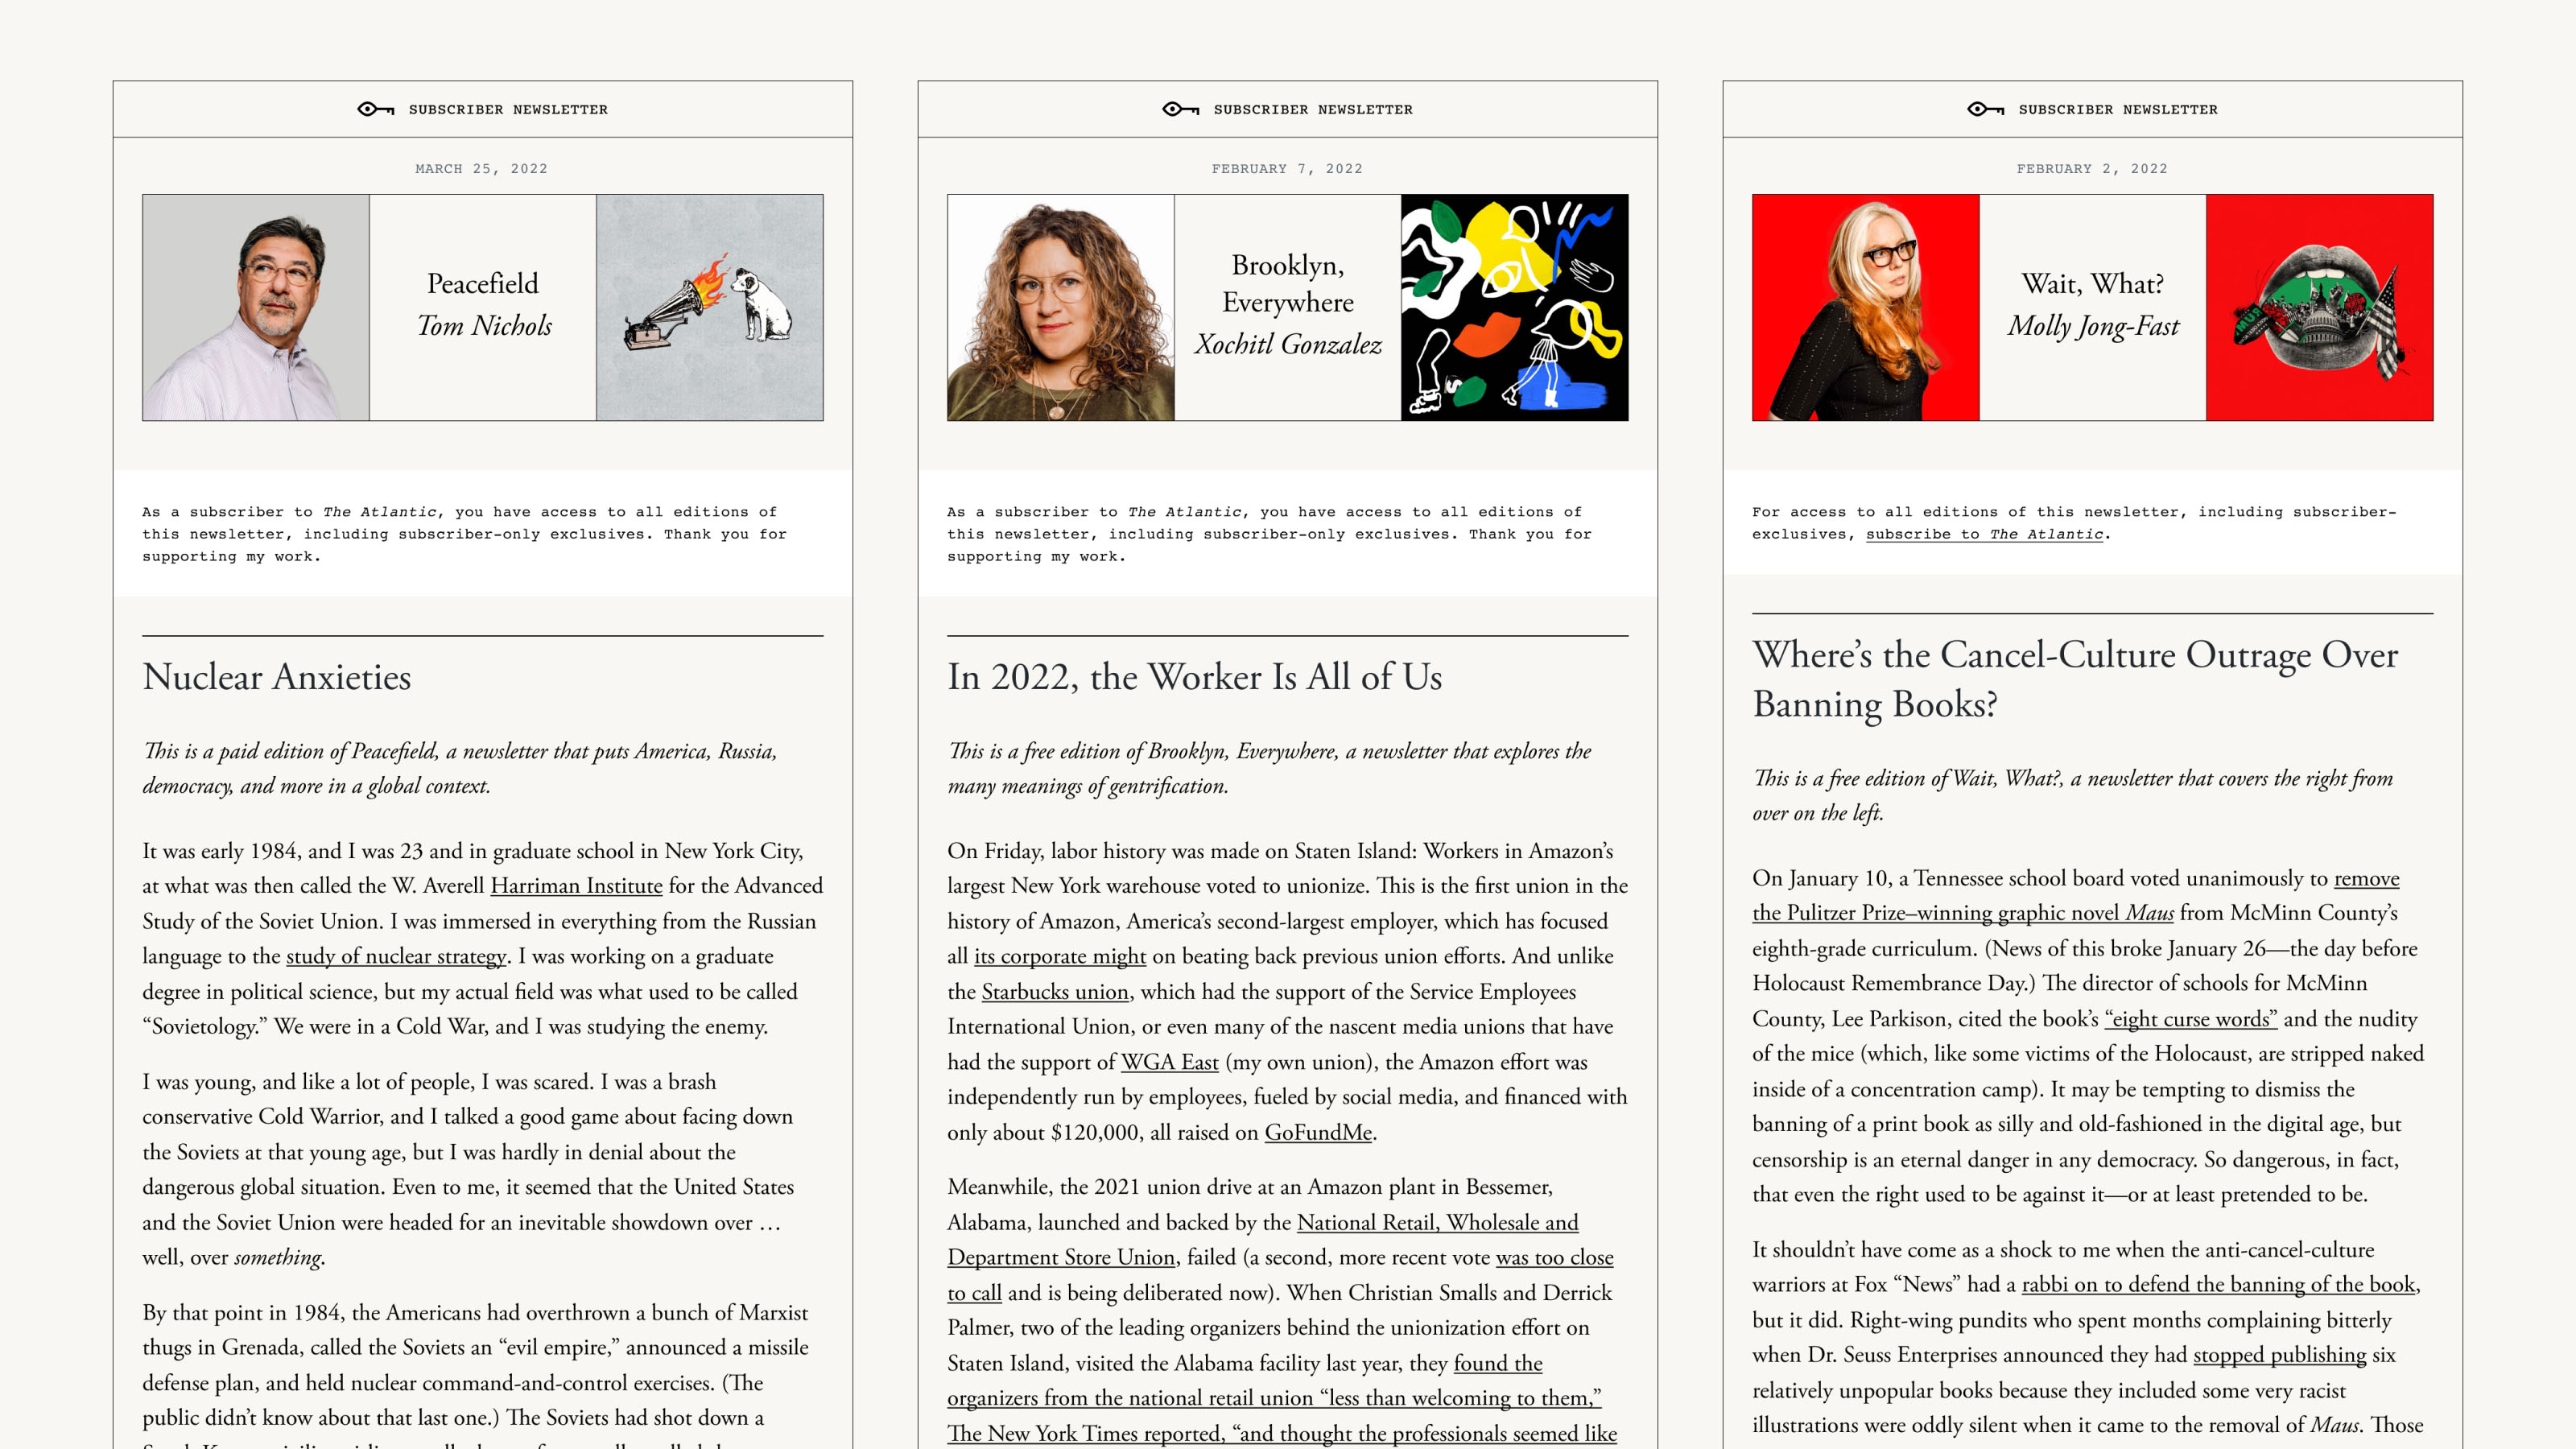 The Atlantic Newsletters Email Designs